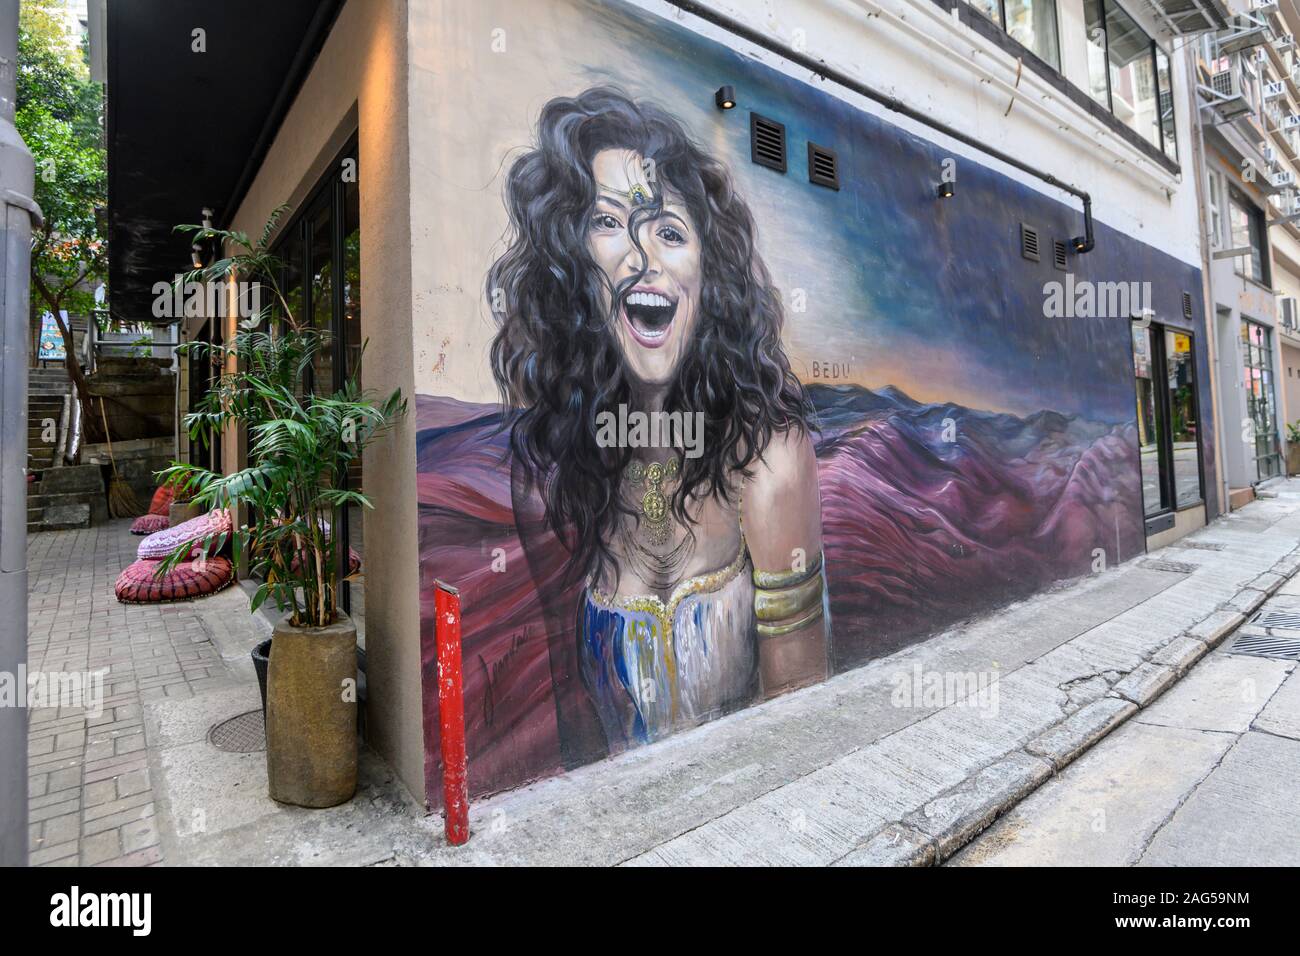 'Street art by Jeandelieu in Central District of Hong Kong.' Stock Photo